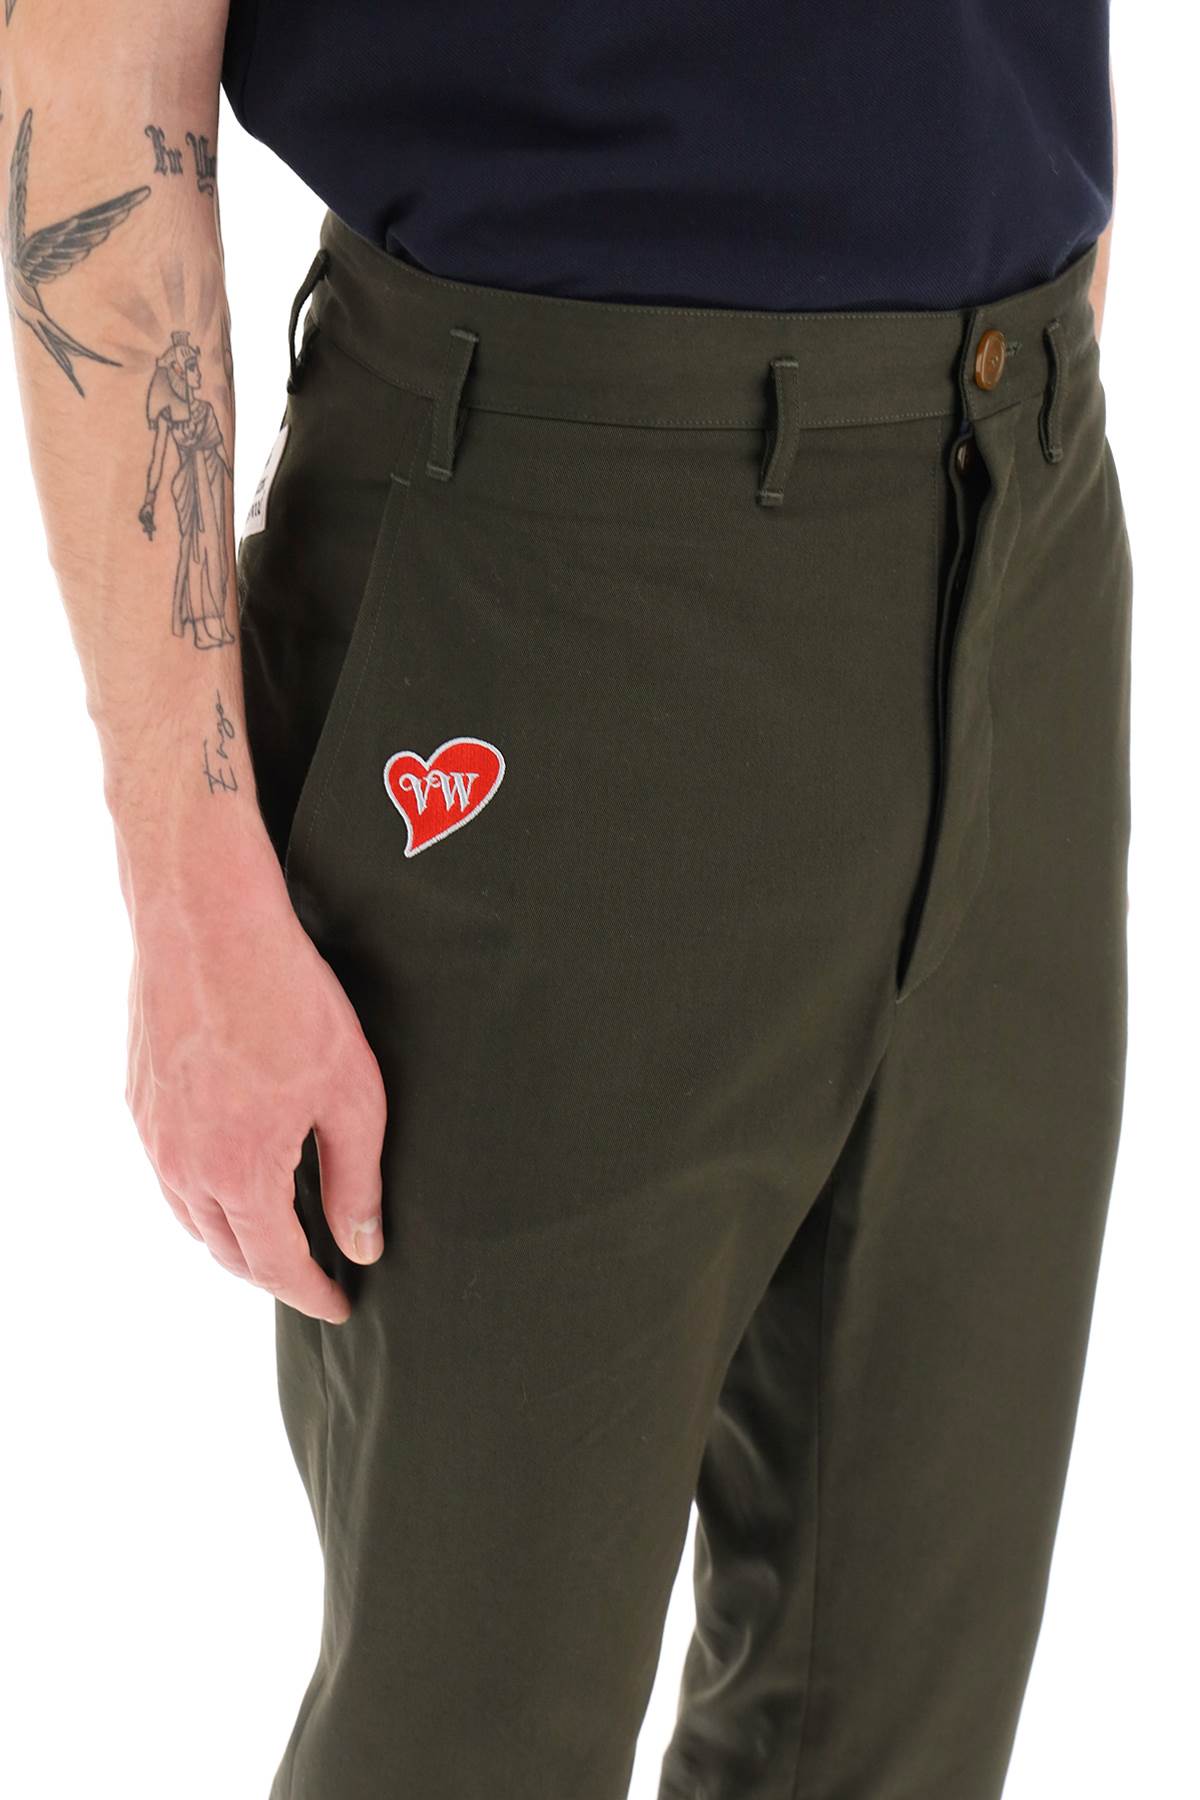 Vivienne westwood cropped cruise pants featuring embroidered heart-shaped logo-3